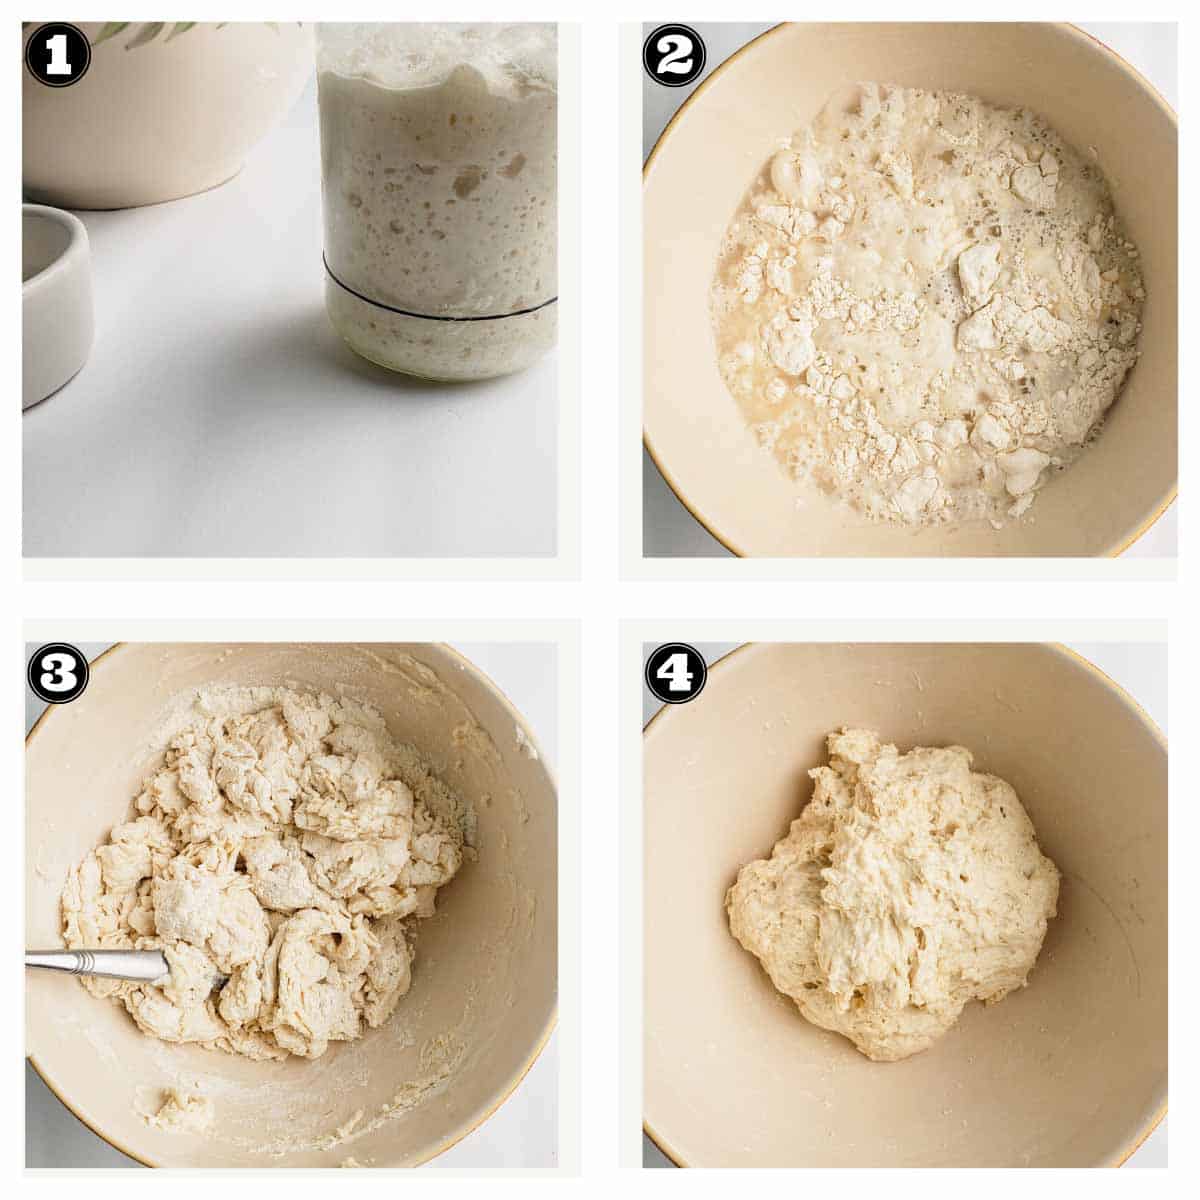 images showing stages of making the dough